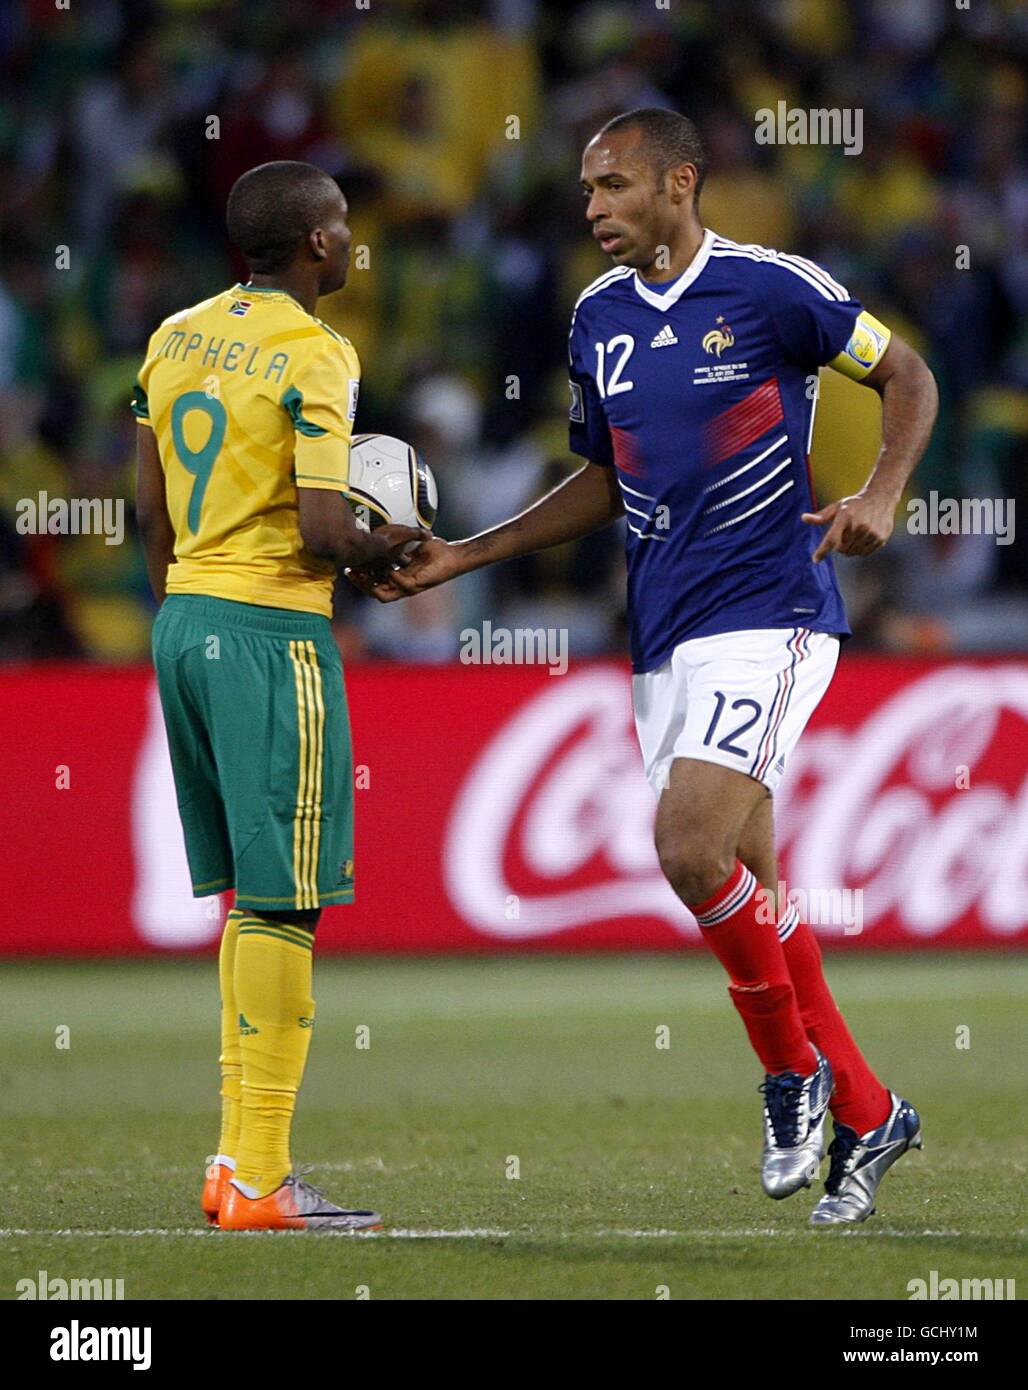 France's Thierry Henry (right) hands the ball to South Africa's Katlego Mphela (left) to restart the game after France score their only goal of the game Stock Photo